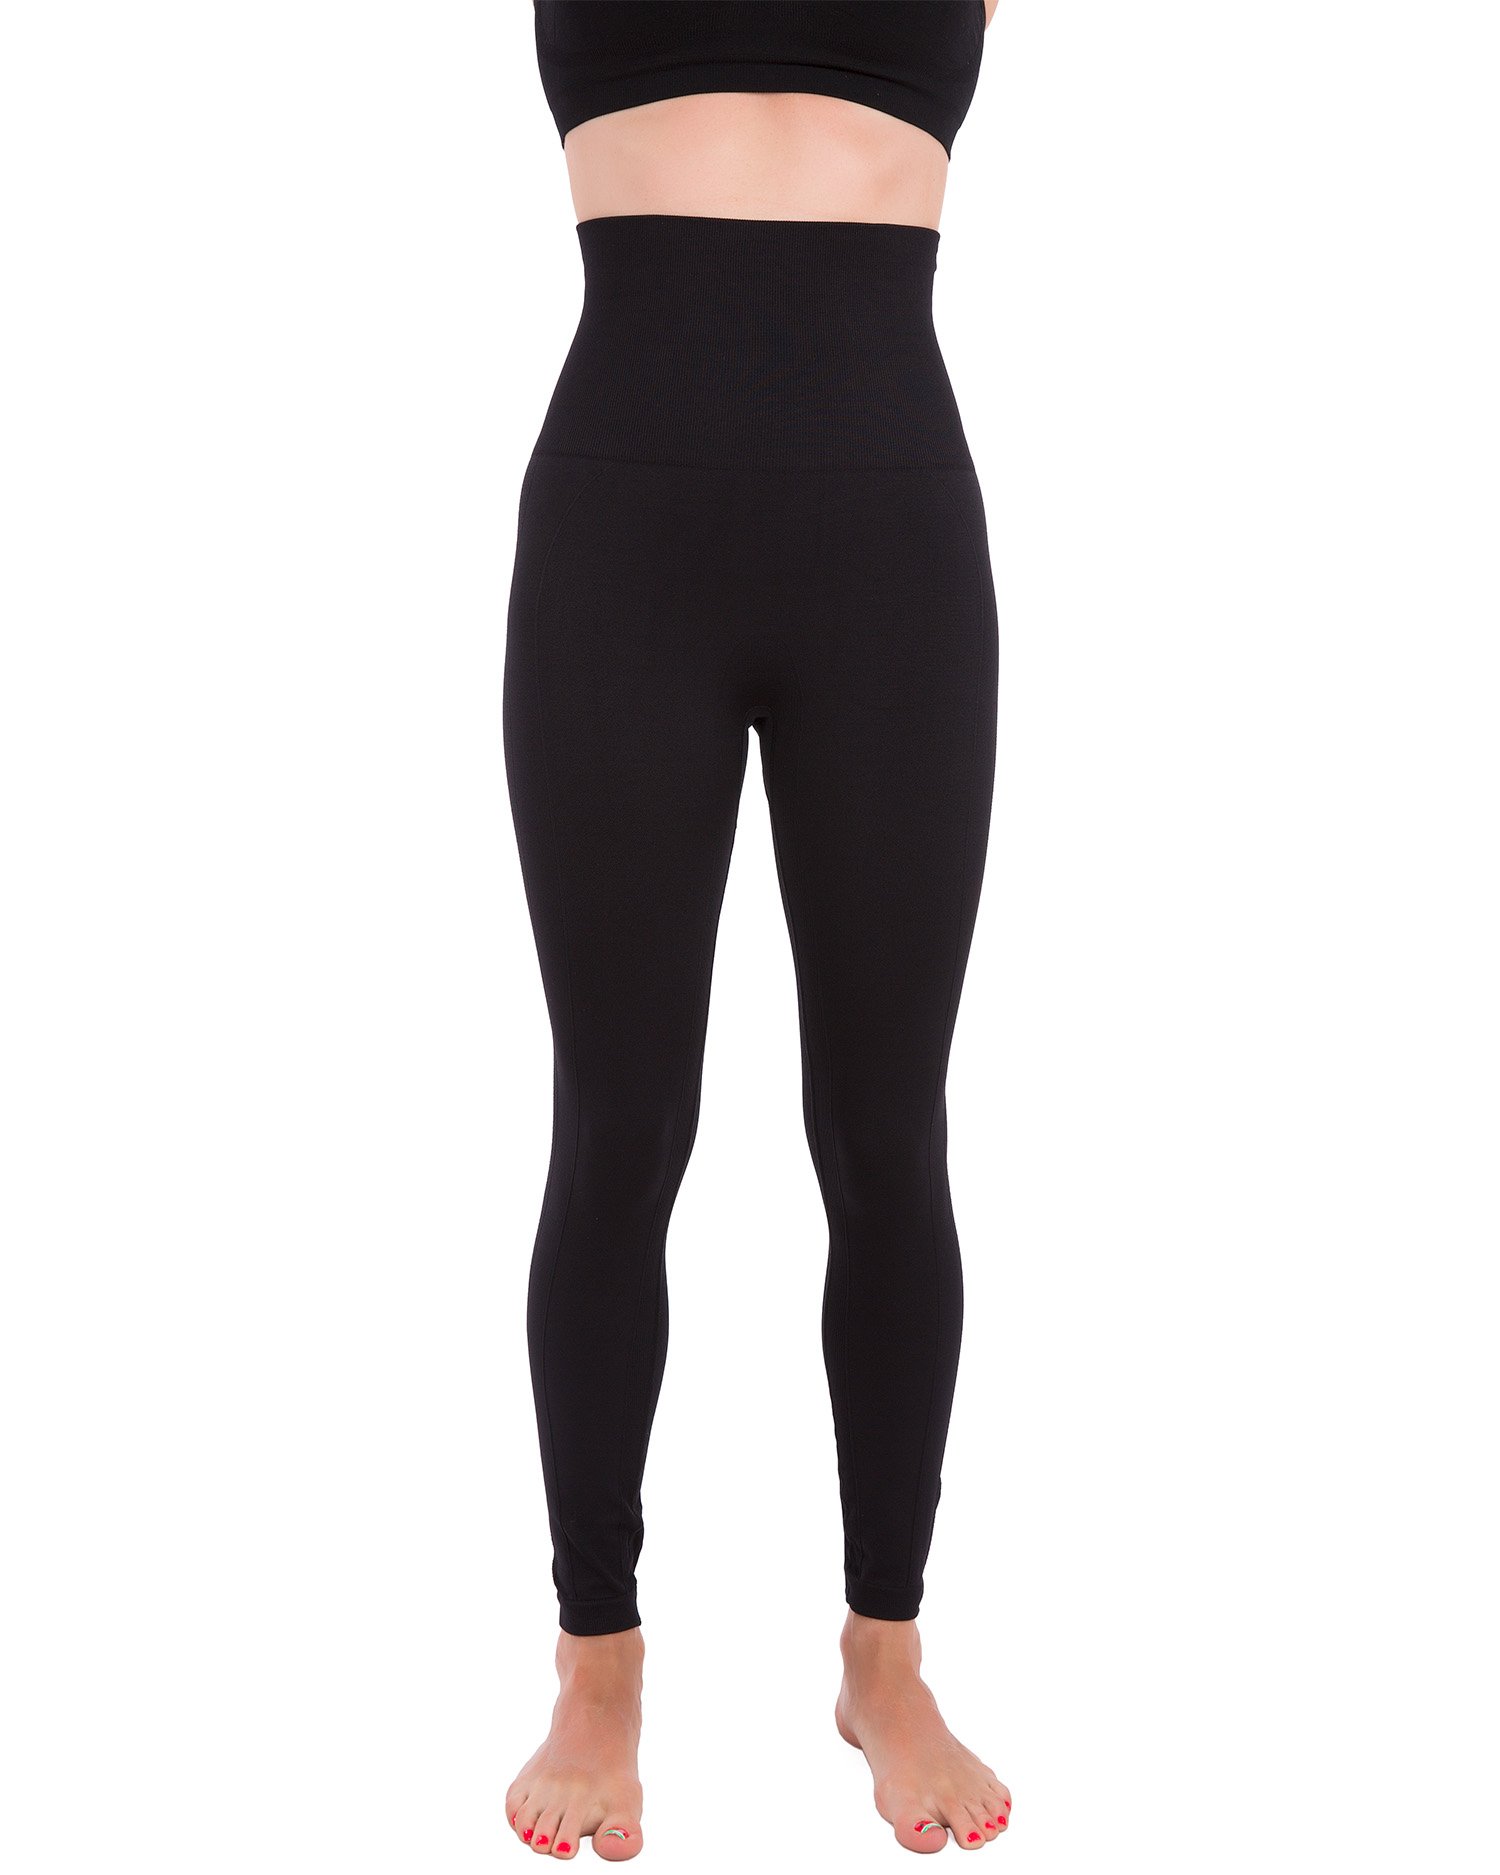 The 8 Best Black Leggings With Insane Amazon Reviews | Who What Wear